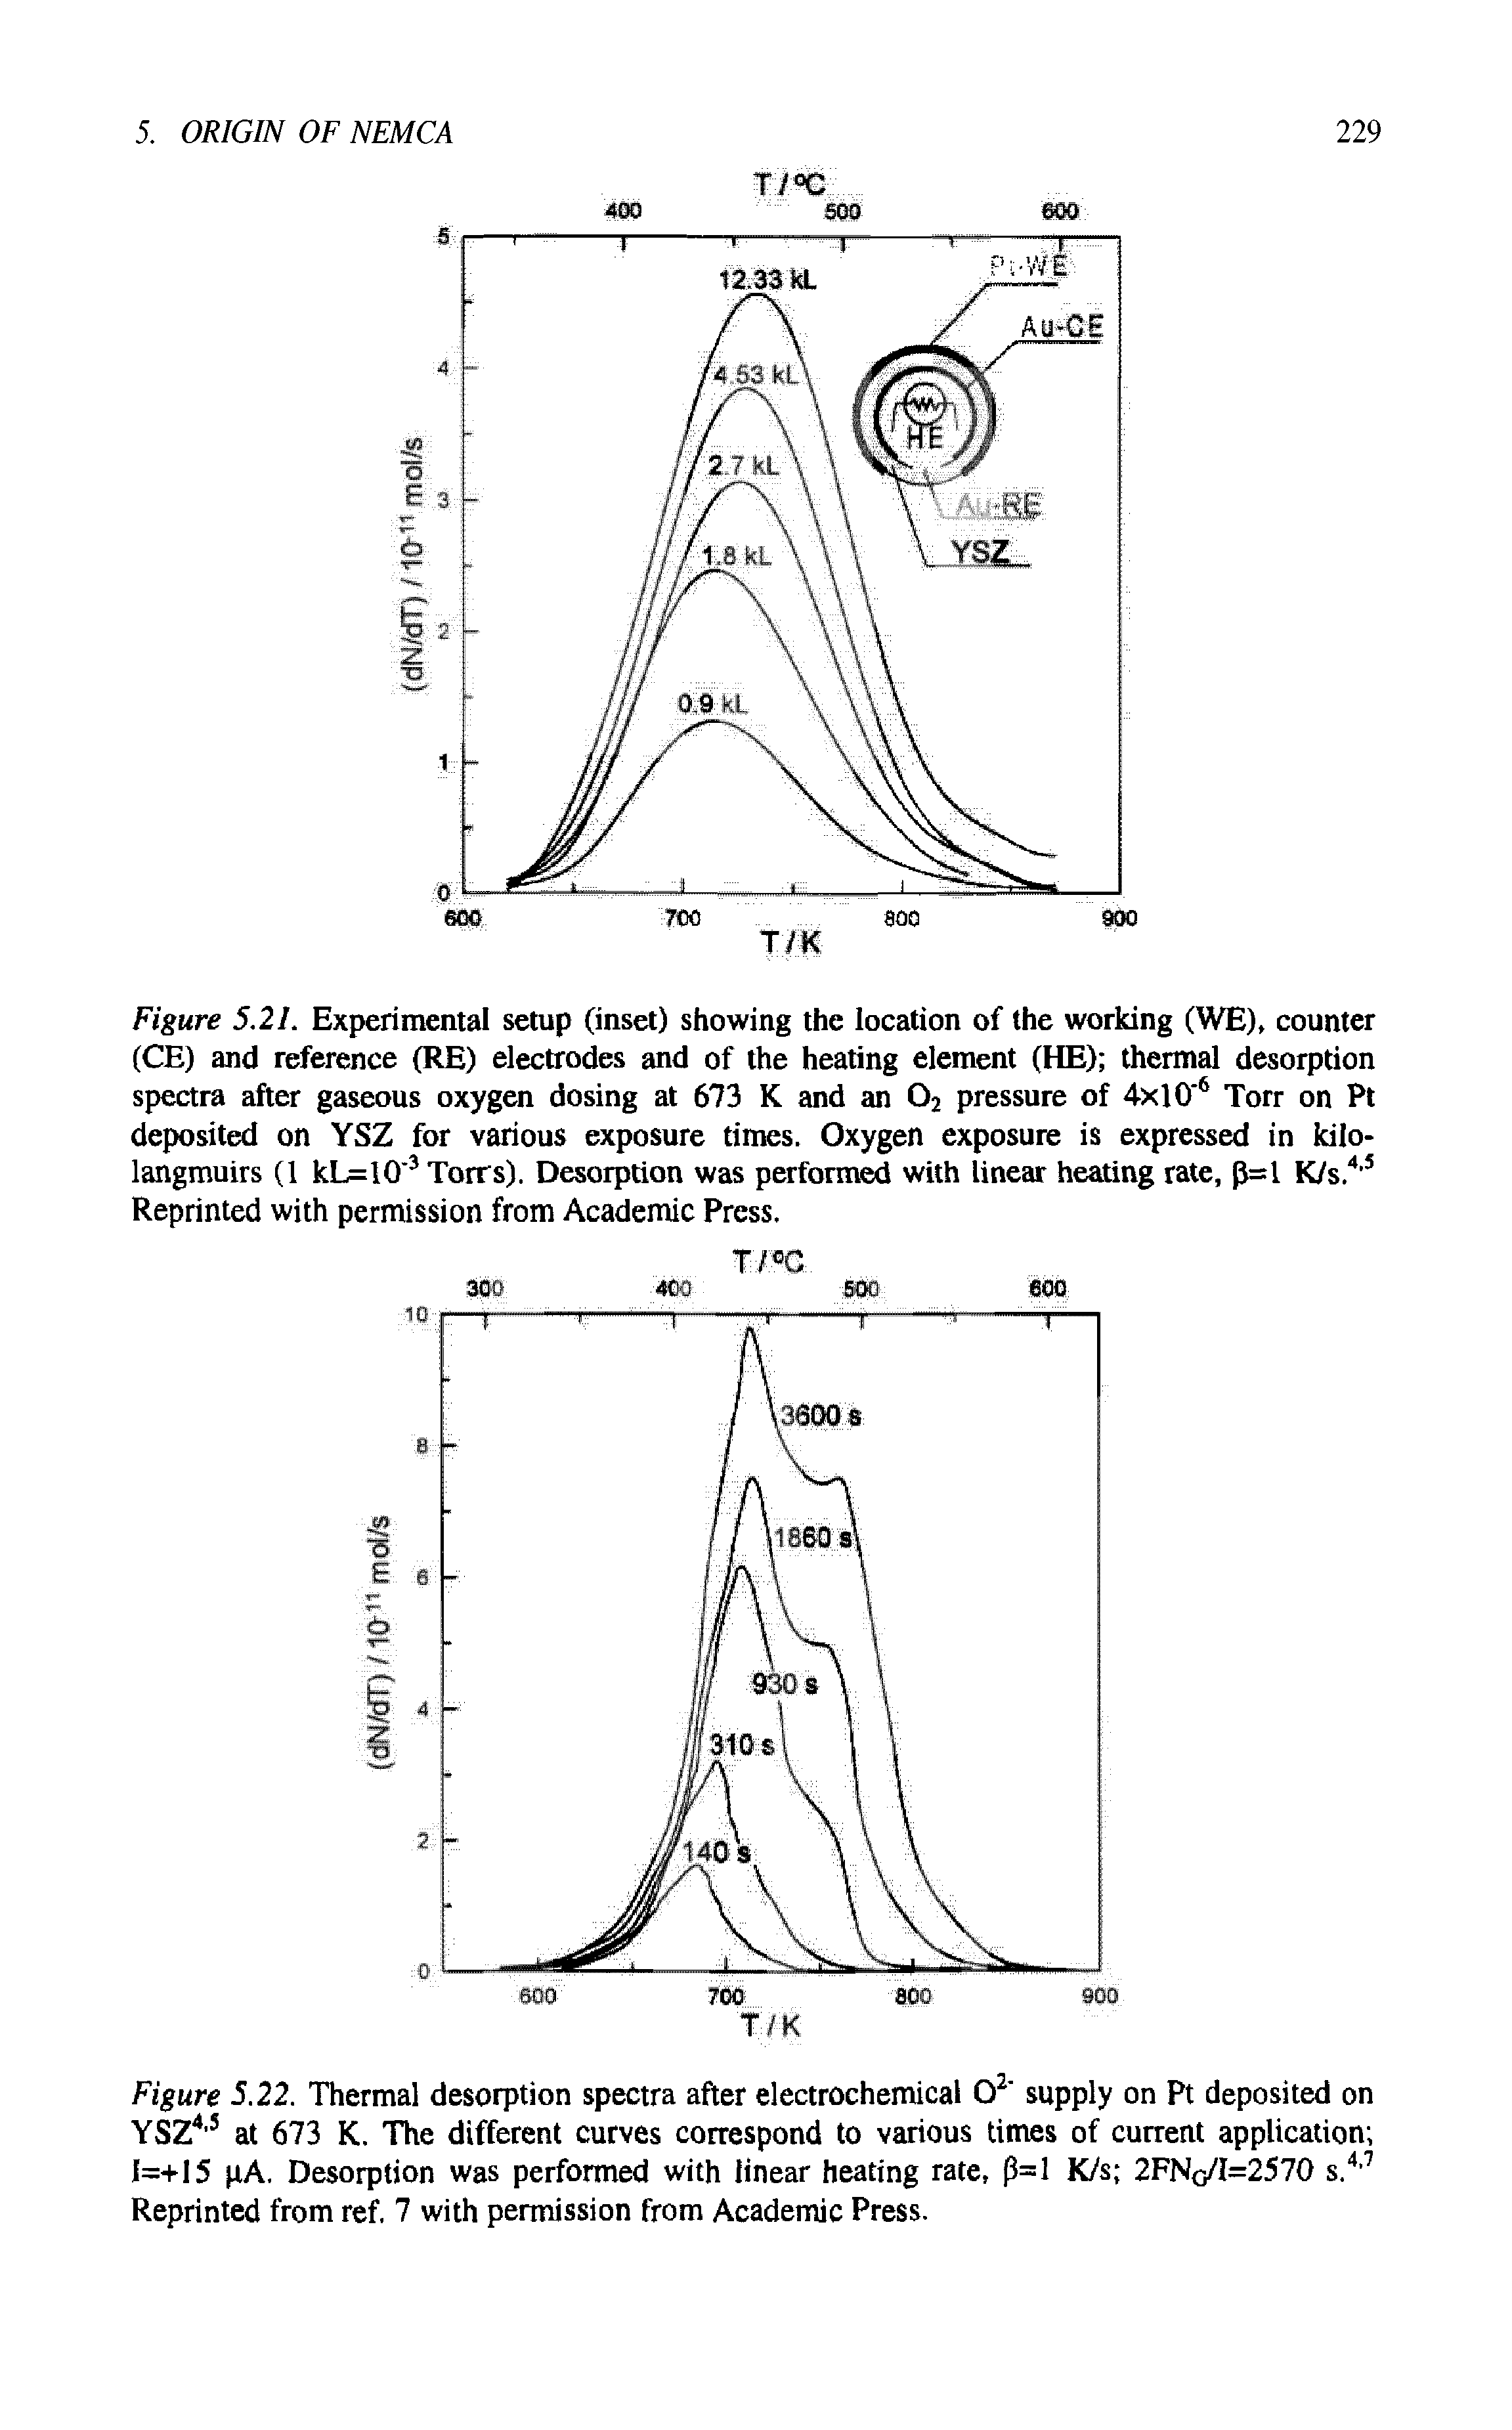 Figure 5.22. Thermal desorption spectra after electrochemical O2 supply on Pt deposited on YSZ4,s at 673 K. The different curves correspond to various times of current application I=+I5 pA. Desorption was performed with linear heating rate, p=l K/s 2FNg/I=2570 s.4,7 Reprinted from ref. 7 with permission from Academic Press.